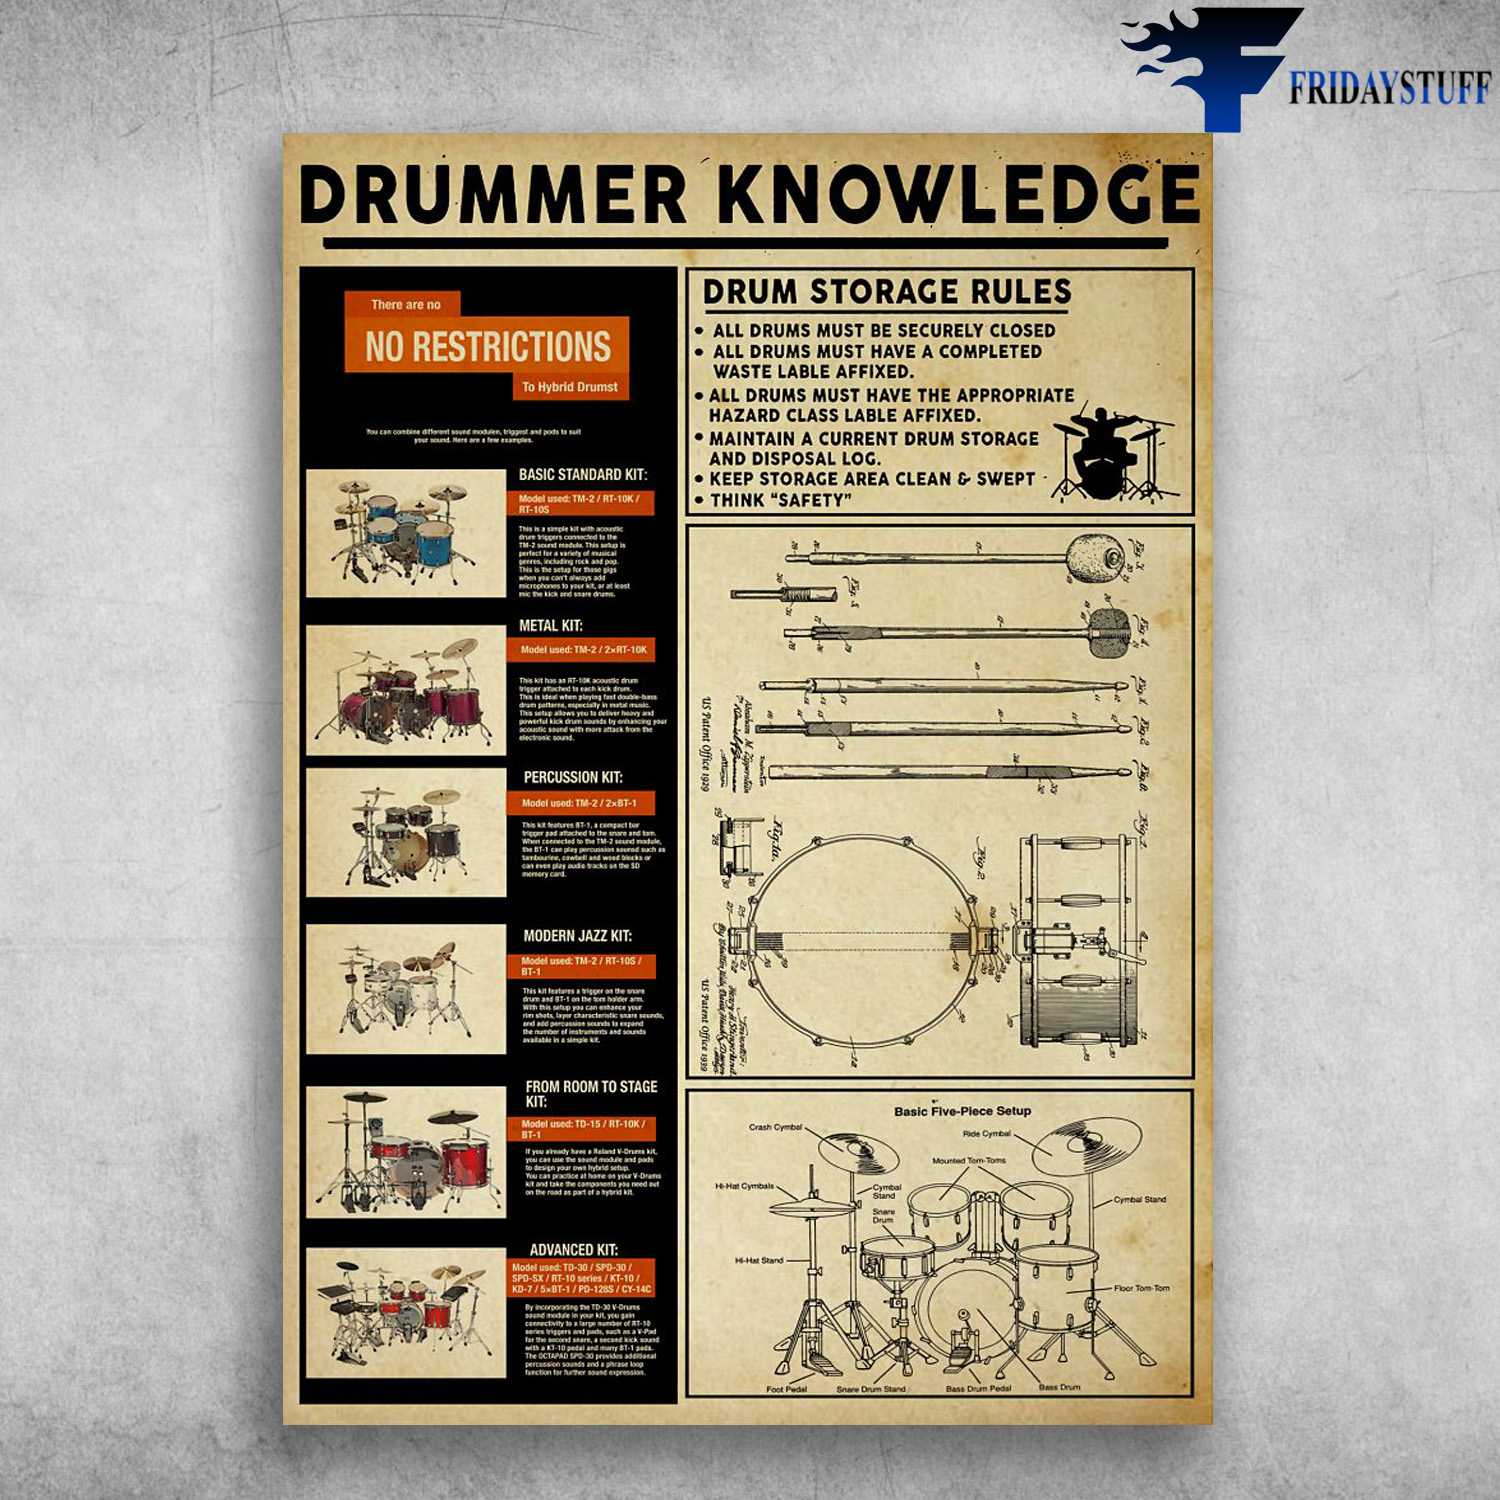 Drummer Knowledge - There Are No Restriction, Drum Storage Rules, All Drums Must Be Securely Closed, All Drums Must Have A Completed Was Lable Affixed, Drum Lover